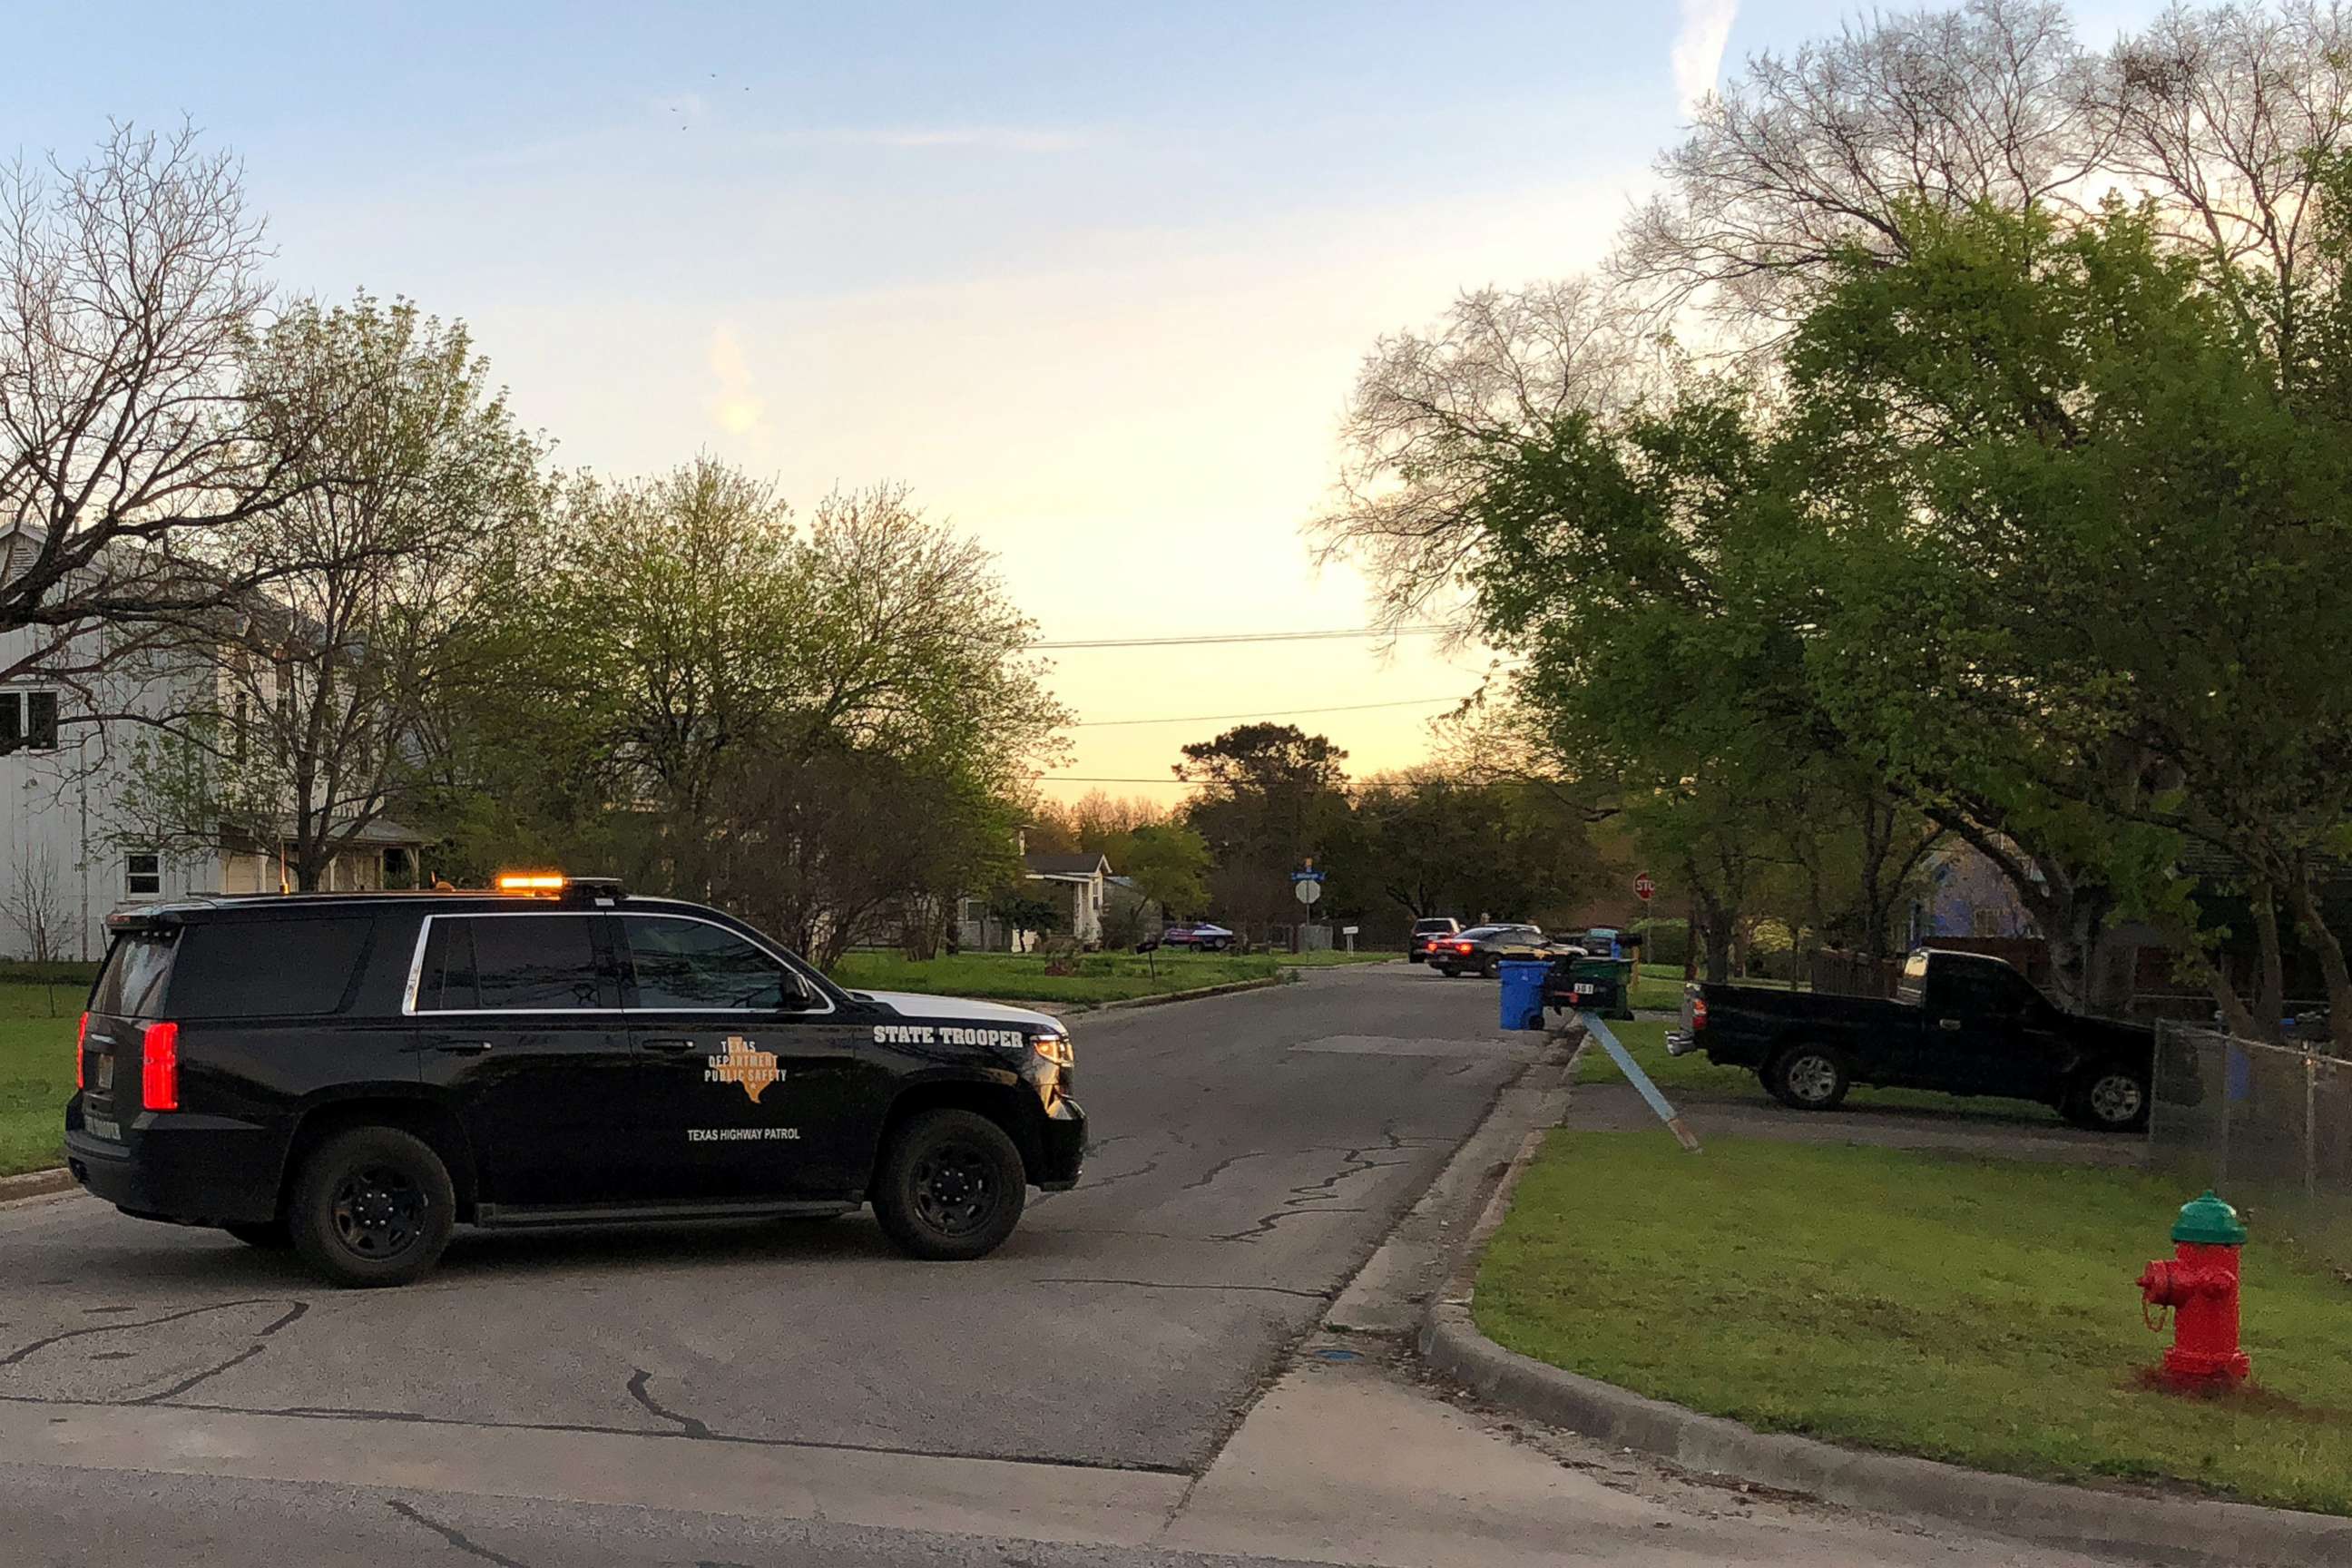 PHOTO: A Texas Department of Public Safety vehicle blocks a street into the neighborhood where the Austin bomb suspect may lived in Pfluggerville, Texas, March 21, 2018.